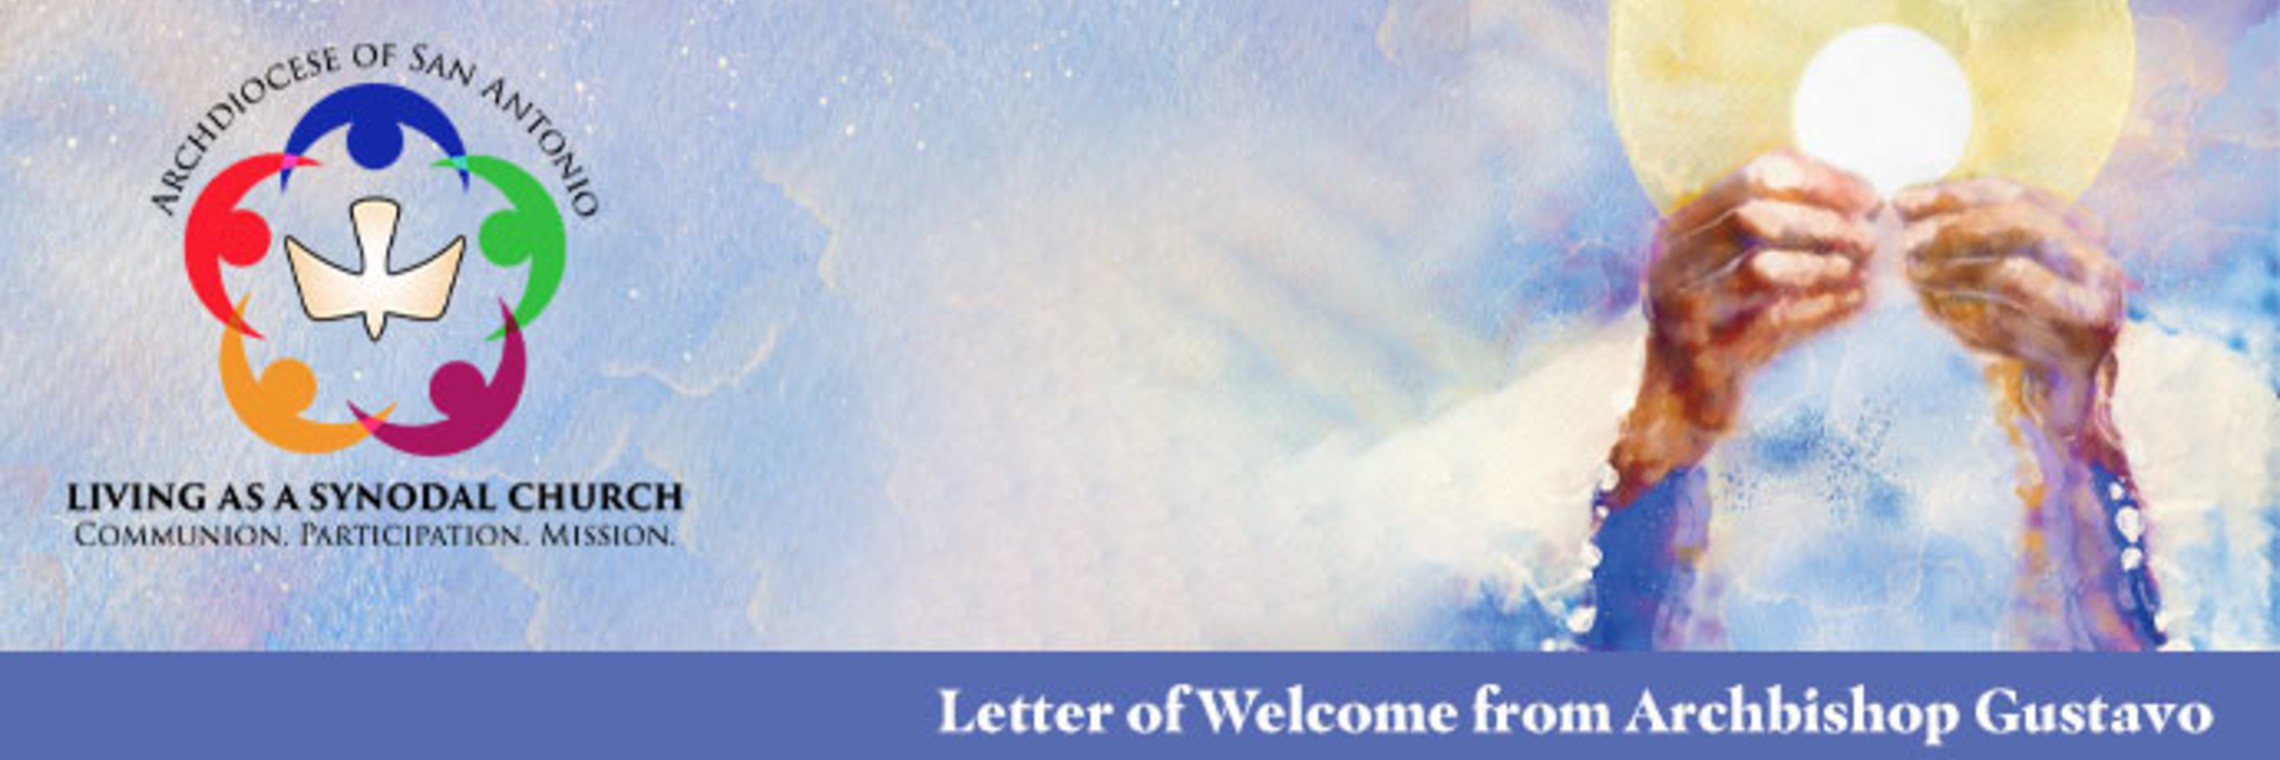 Eucharistic Welcome Banner